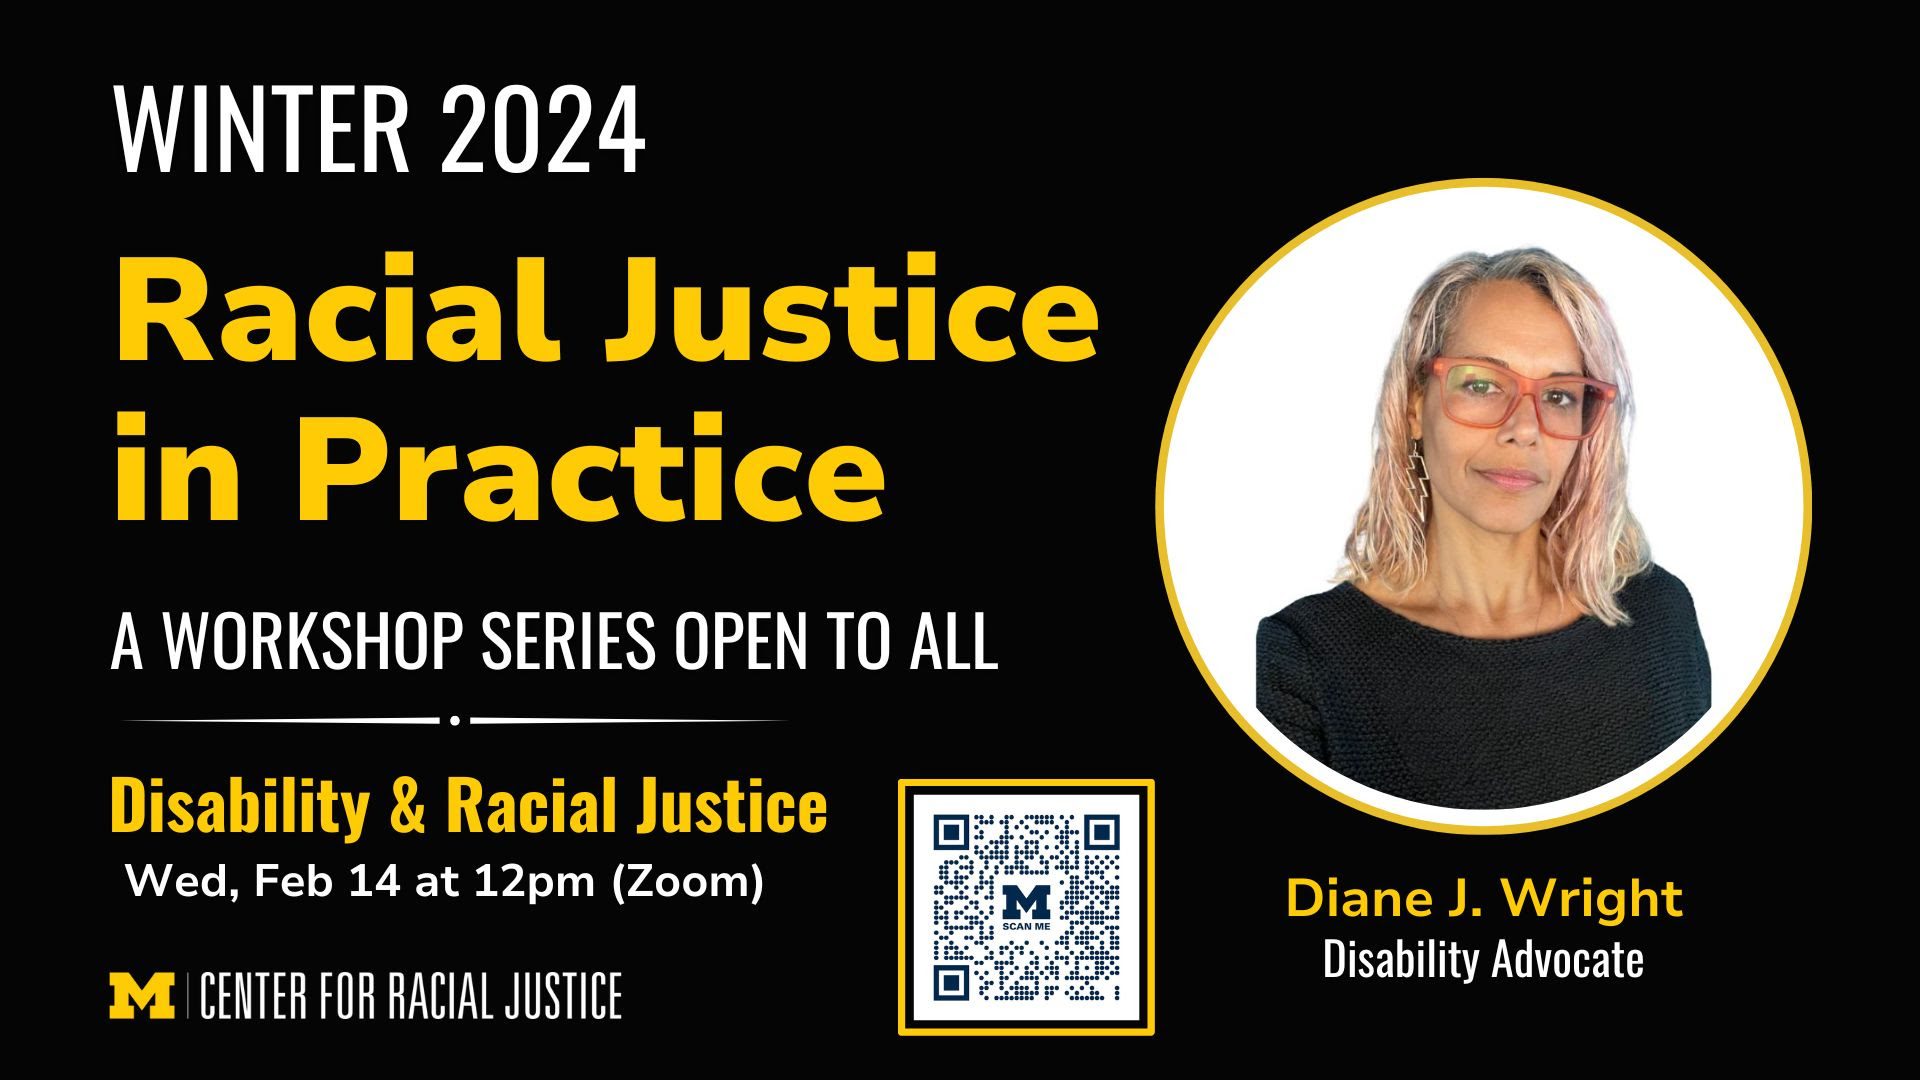 Racial Justice in Practice event flyer with photo of disability advocate Diane J. Wright